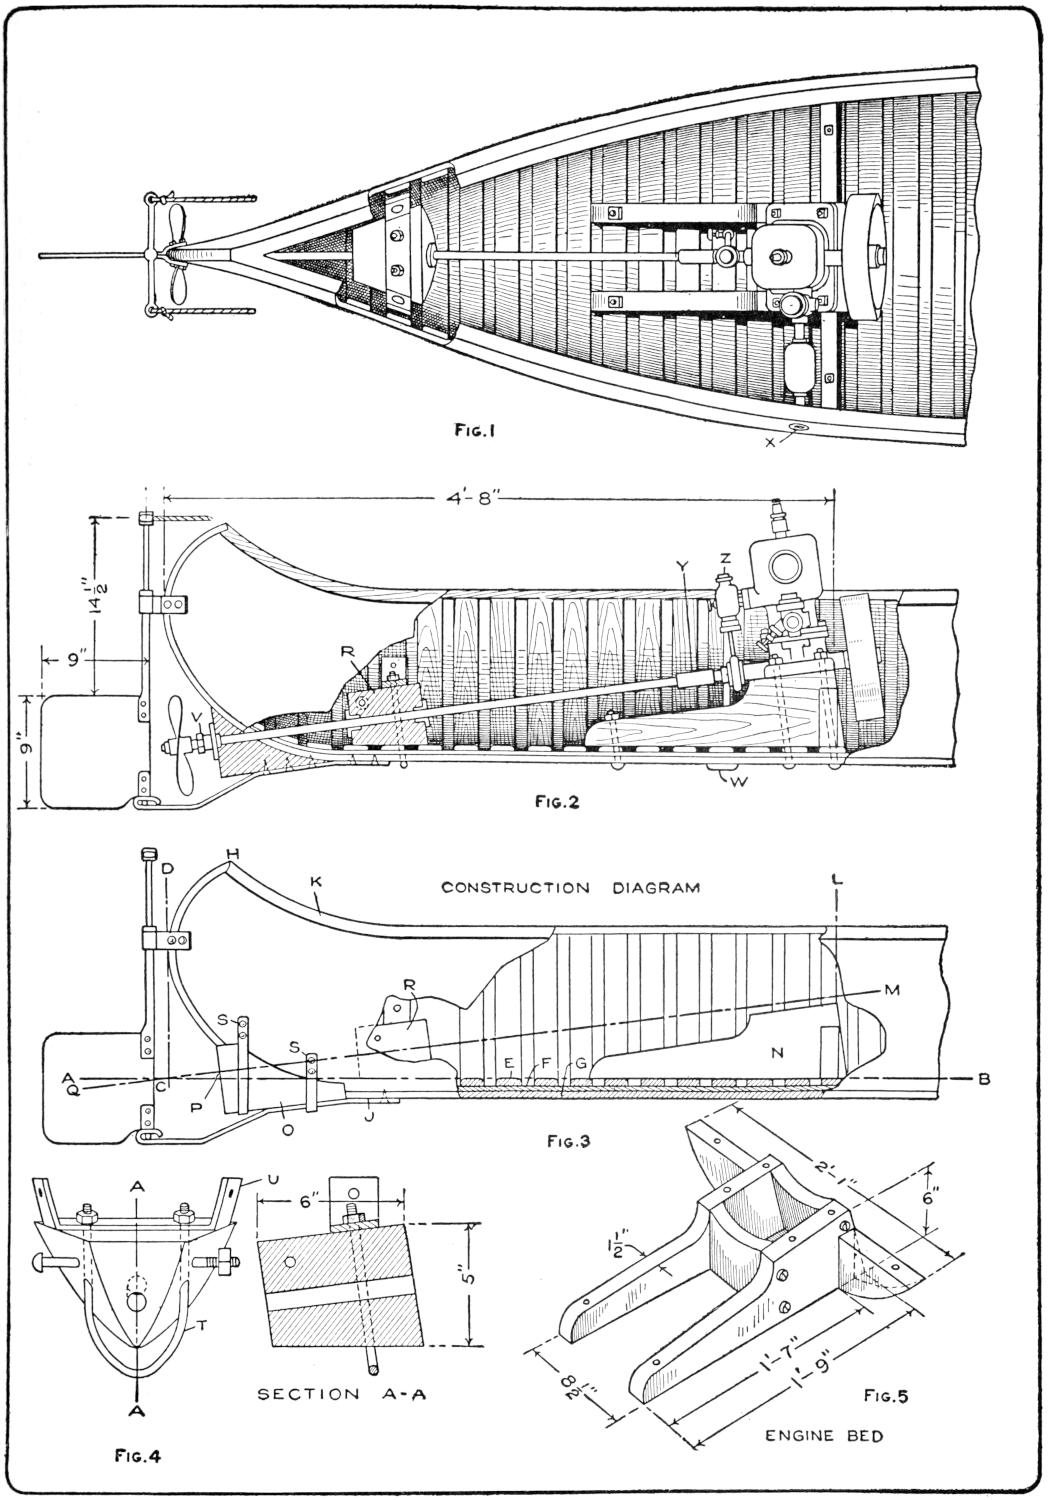 Engine mounting in canoe